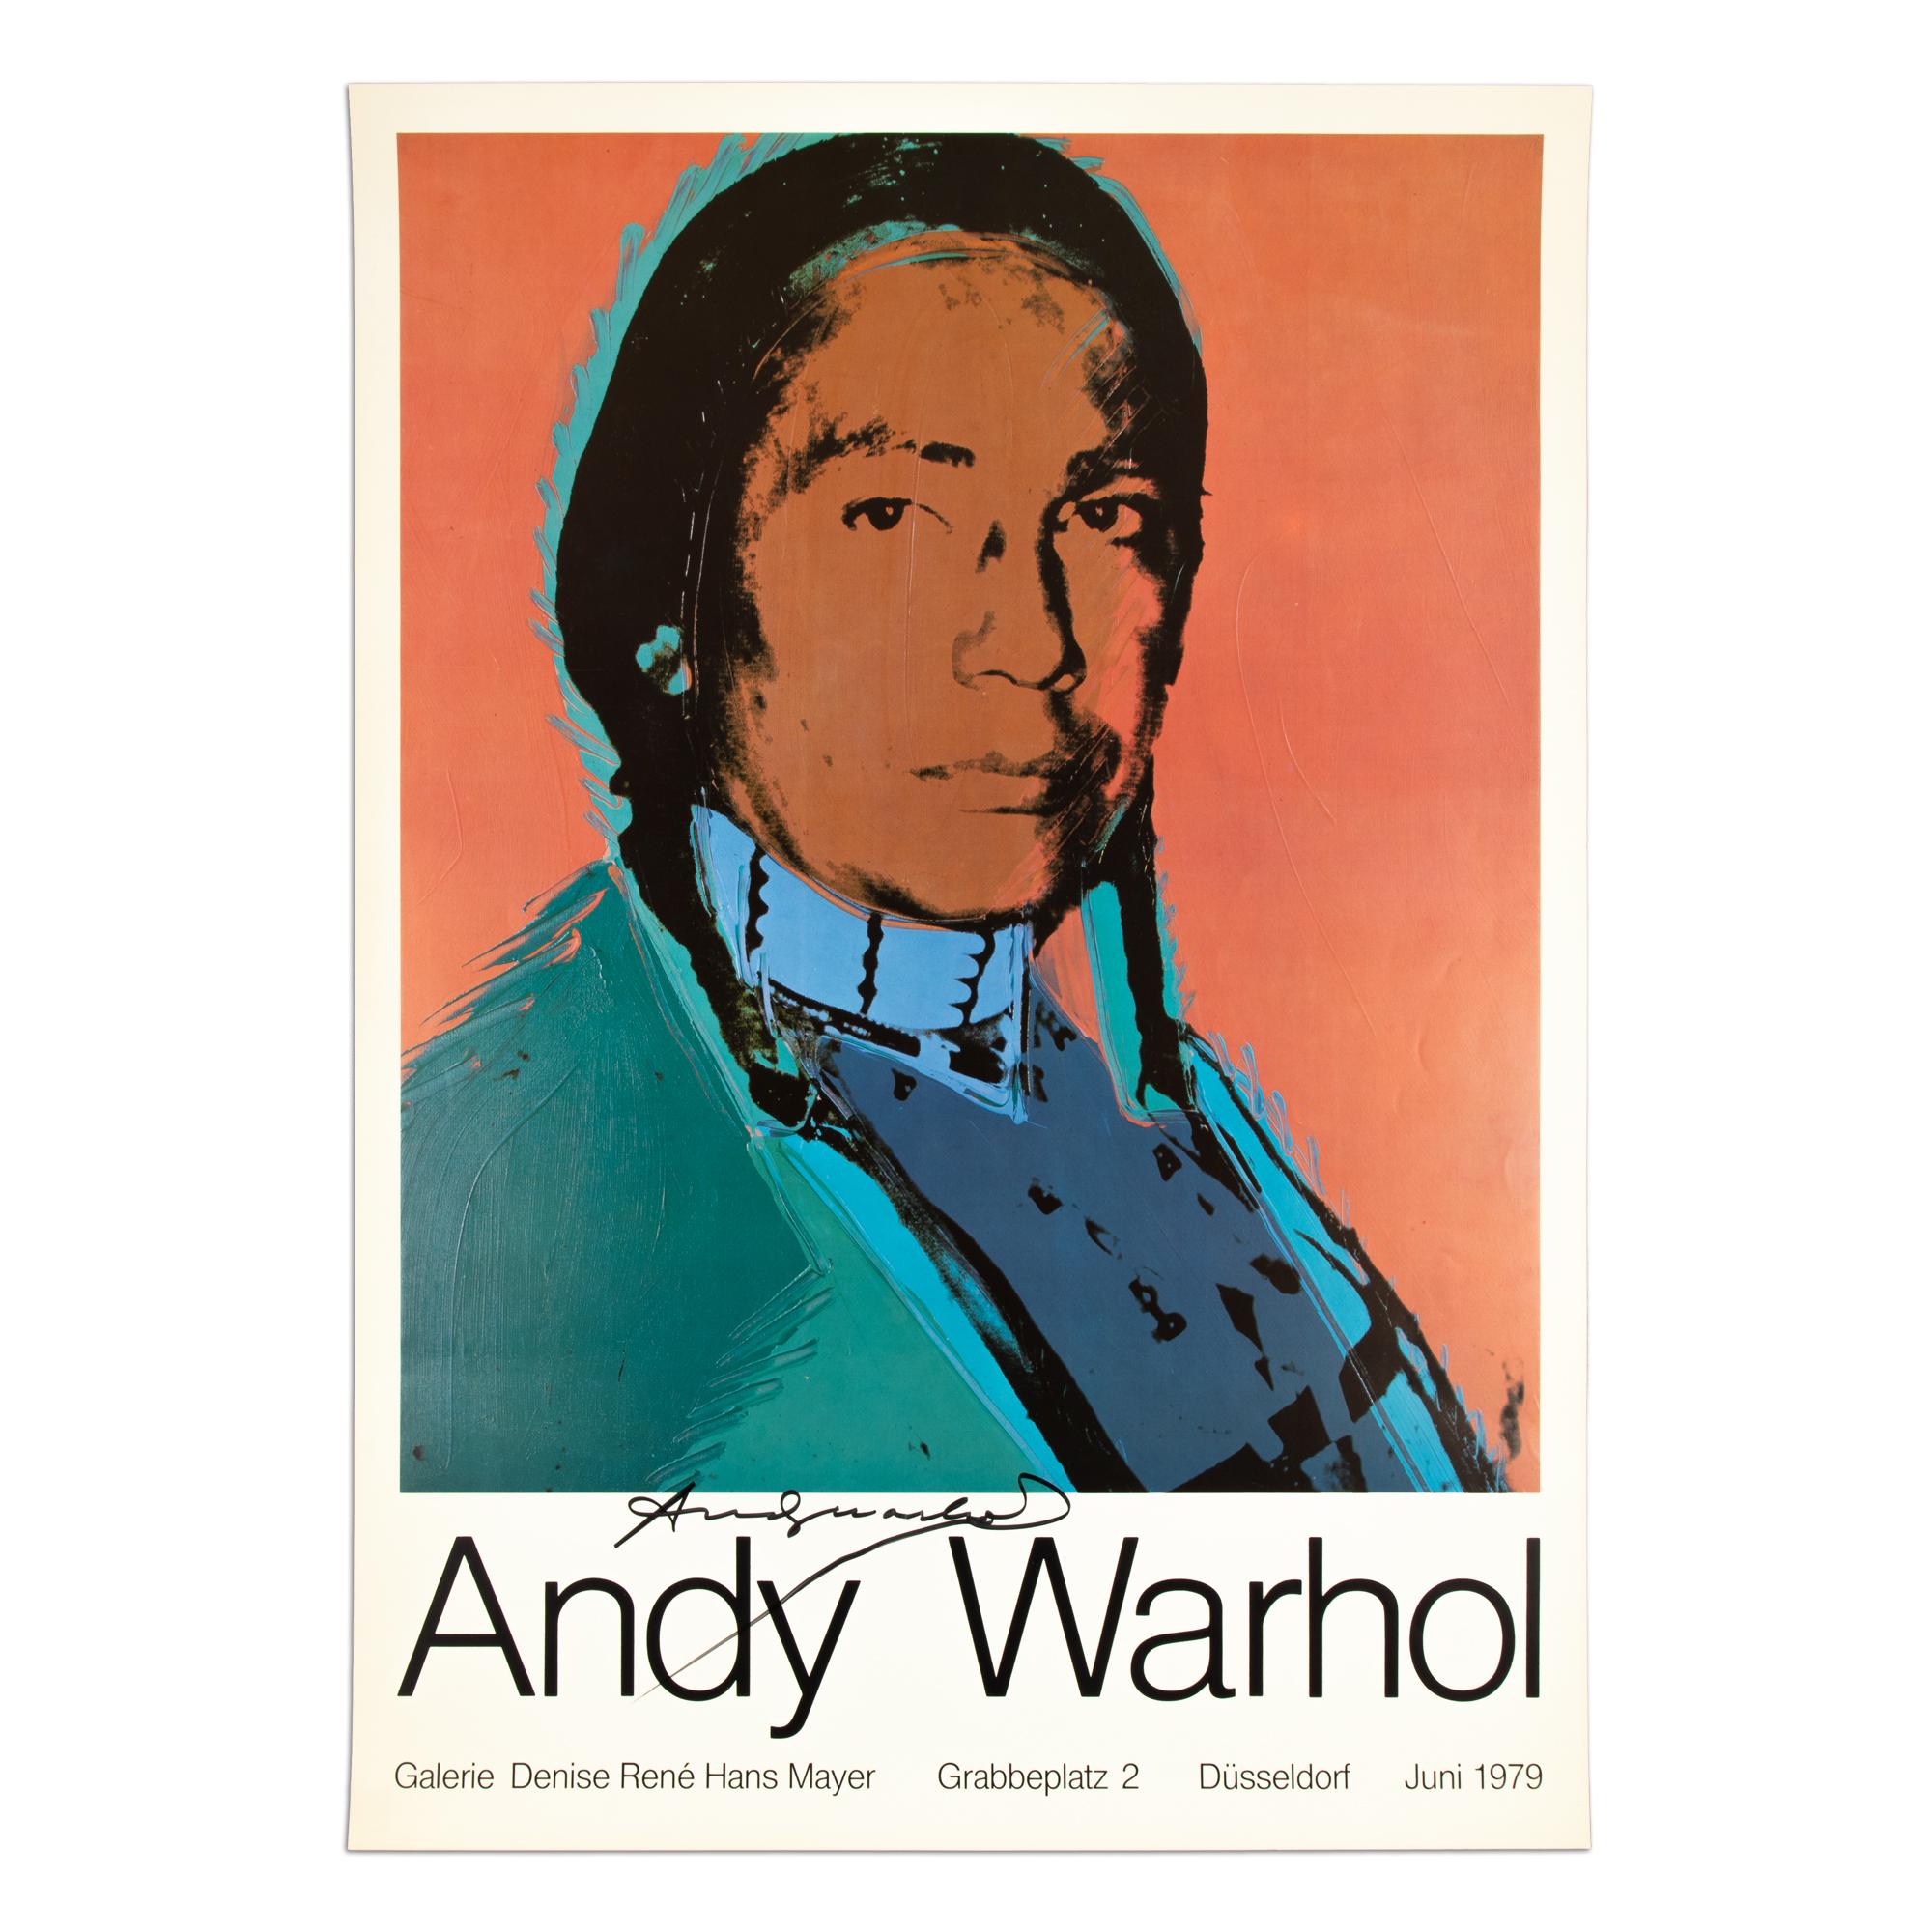 After Andy Warhol (1928-1987)
Russell Means (American Indian), 1979
Medium: Offset lithograph on paper (exhibition poster)
Dimensions: 33 x 23 1/4 inches (84 x 59 cm) 
Publisher: Galerie Denise René Hans Mayer, Düsseldorf
Markings: Hand-signed by